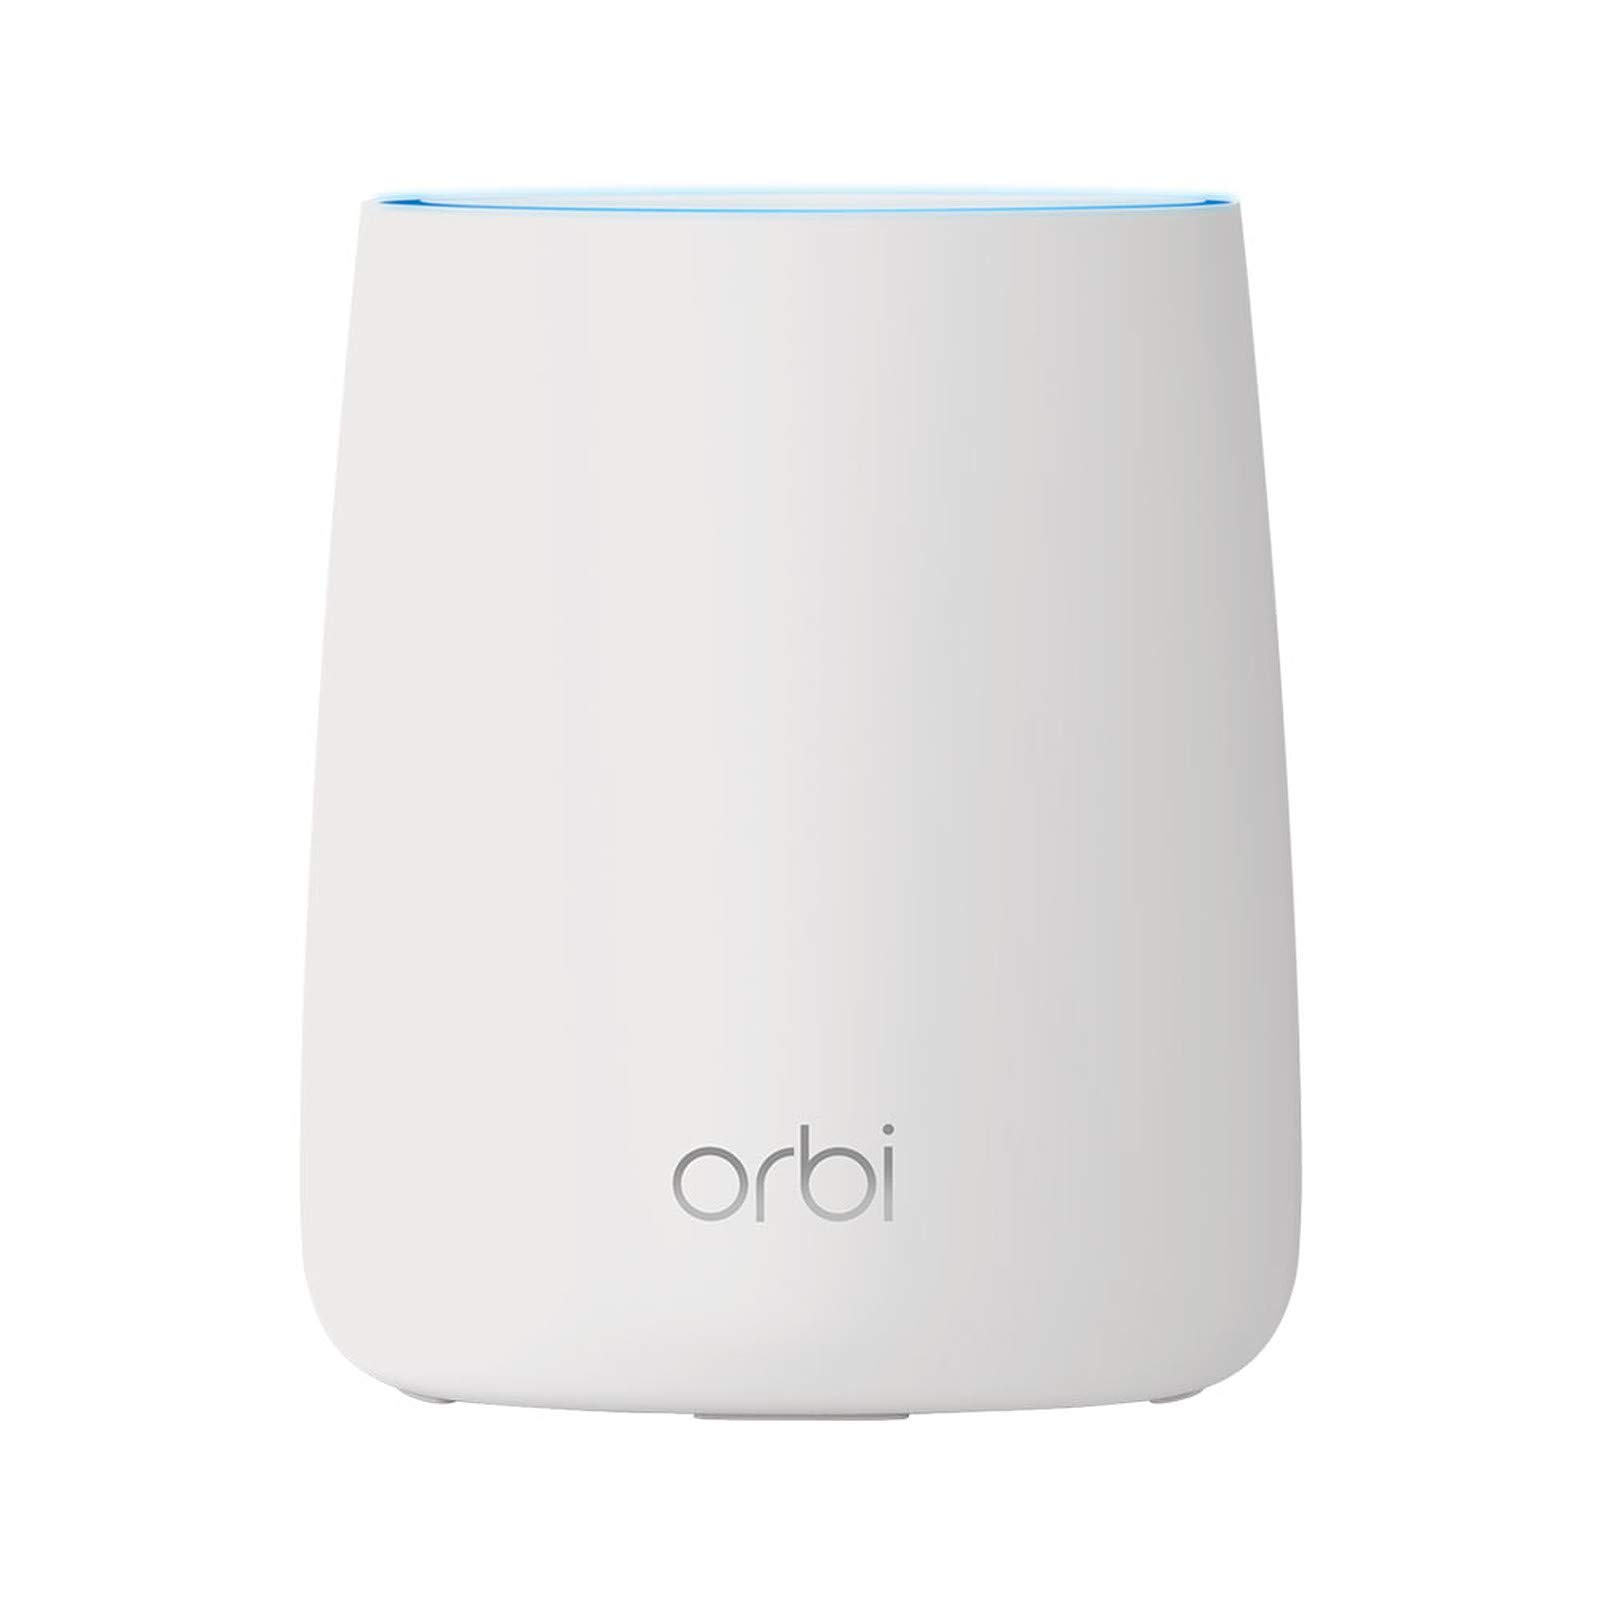 ORBI WHOLE HOME AC2200 ROUTER